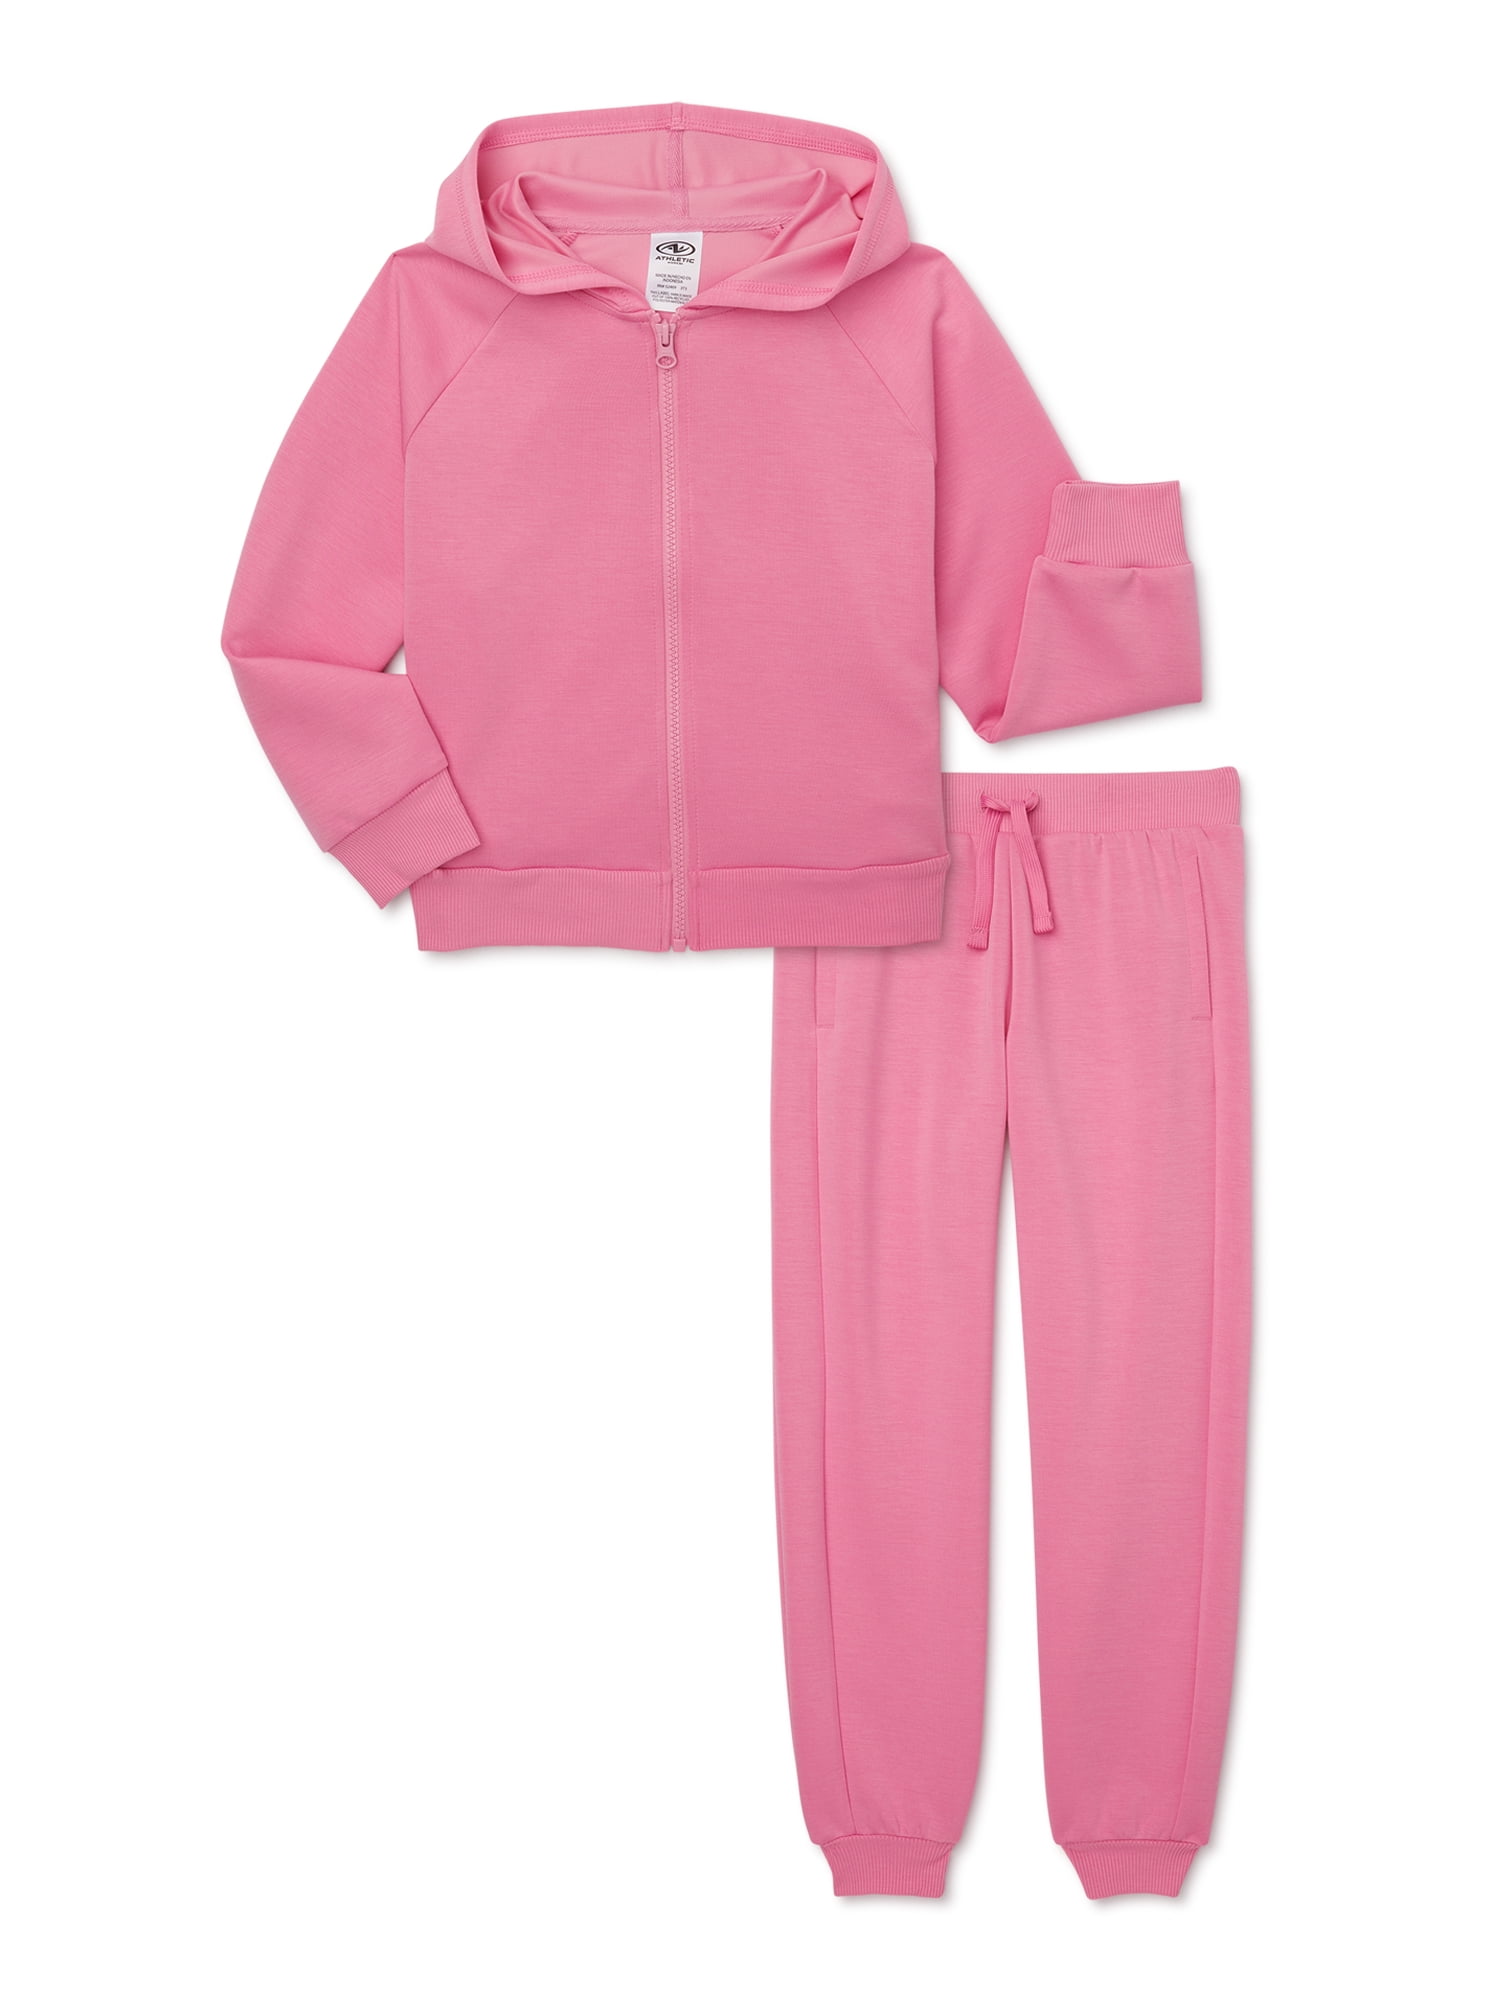 Athletic Works Girls Scuba Zip Hoodie and Joggers Set, Sizes 4-18 & Plus 